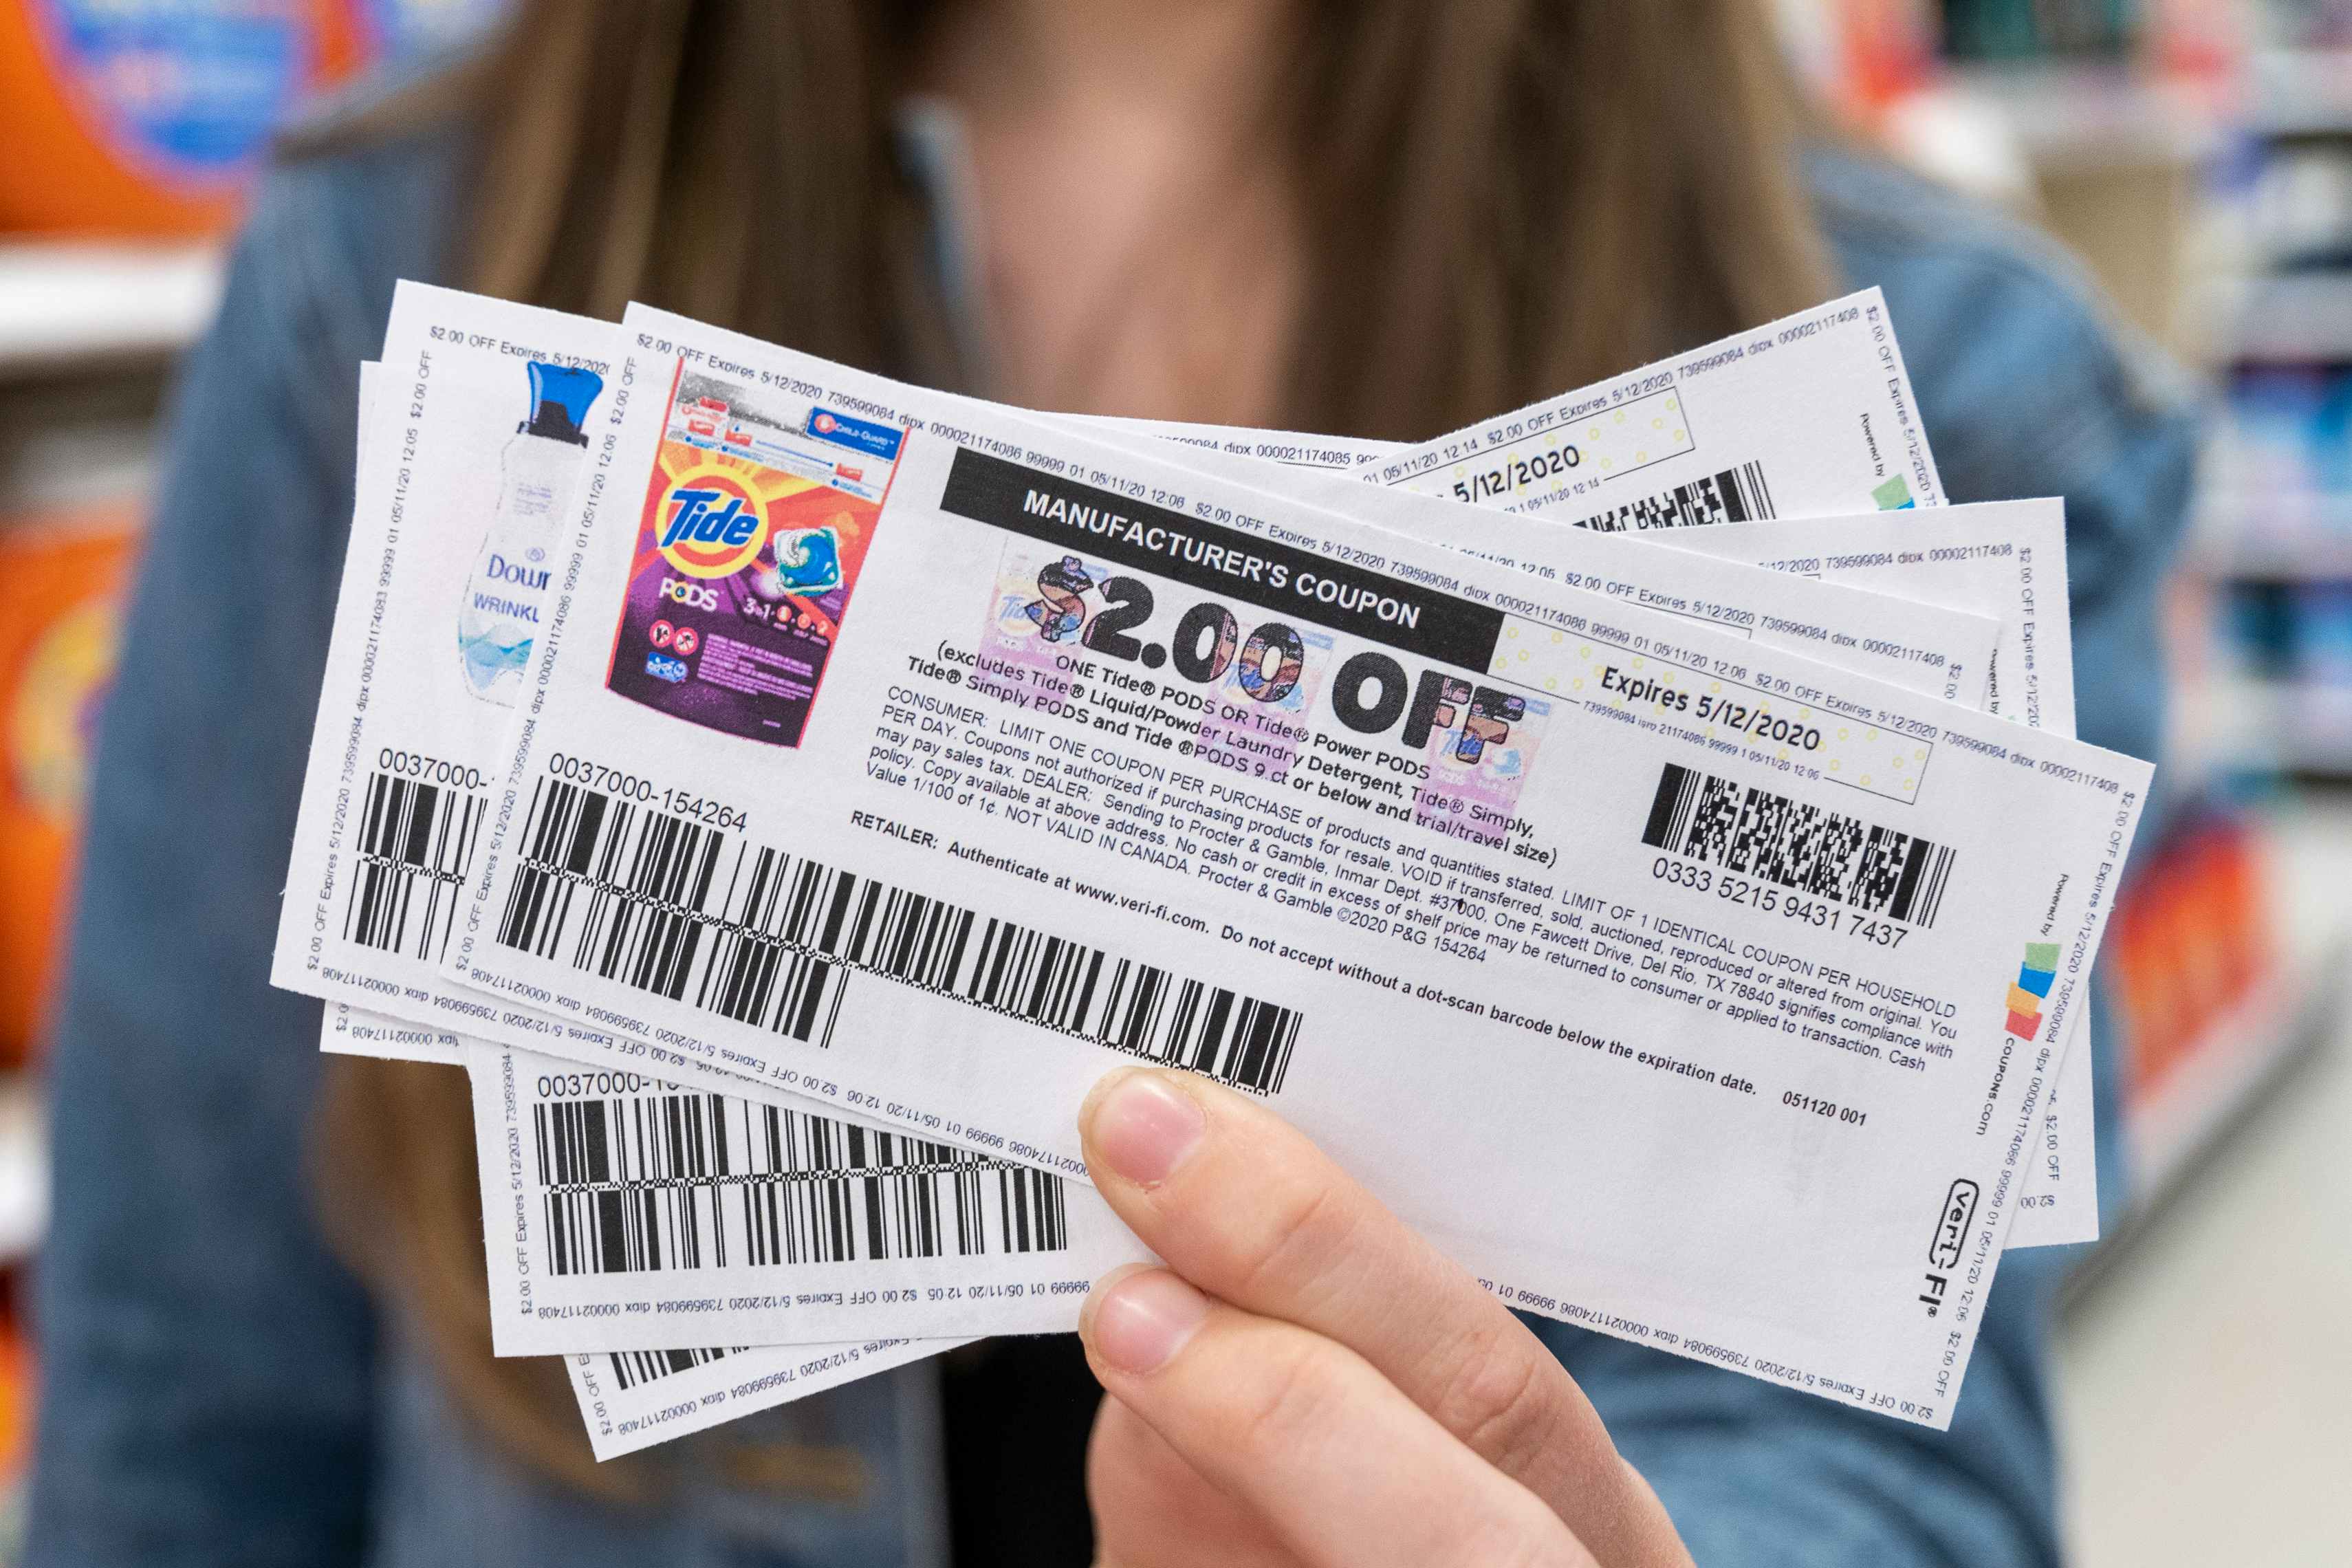 A woman holding out a stack of manufacture coupons. The coupon on top is for $2 off Tide Pods.